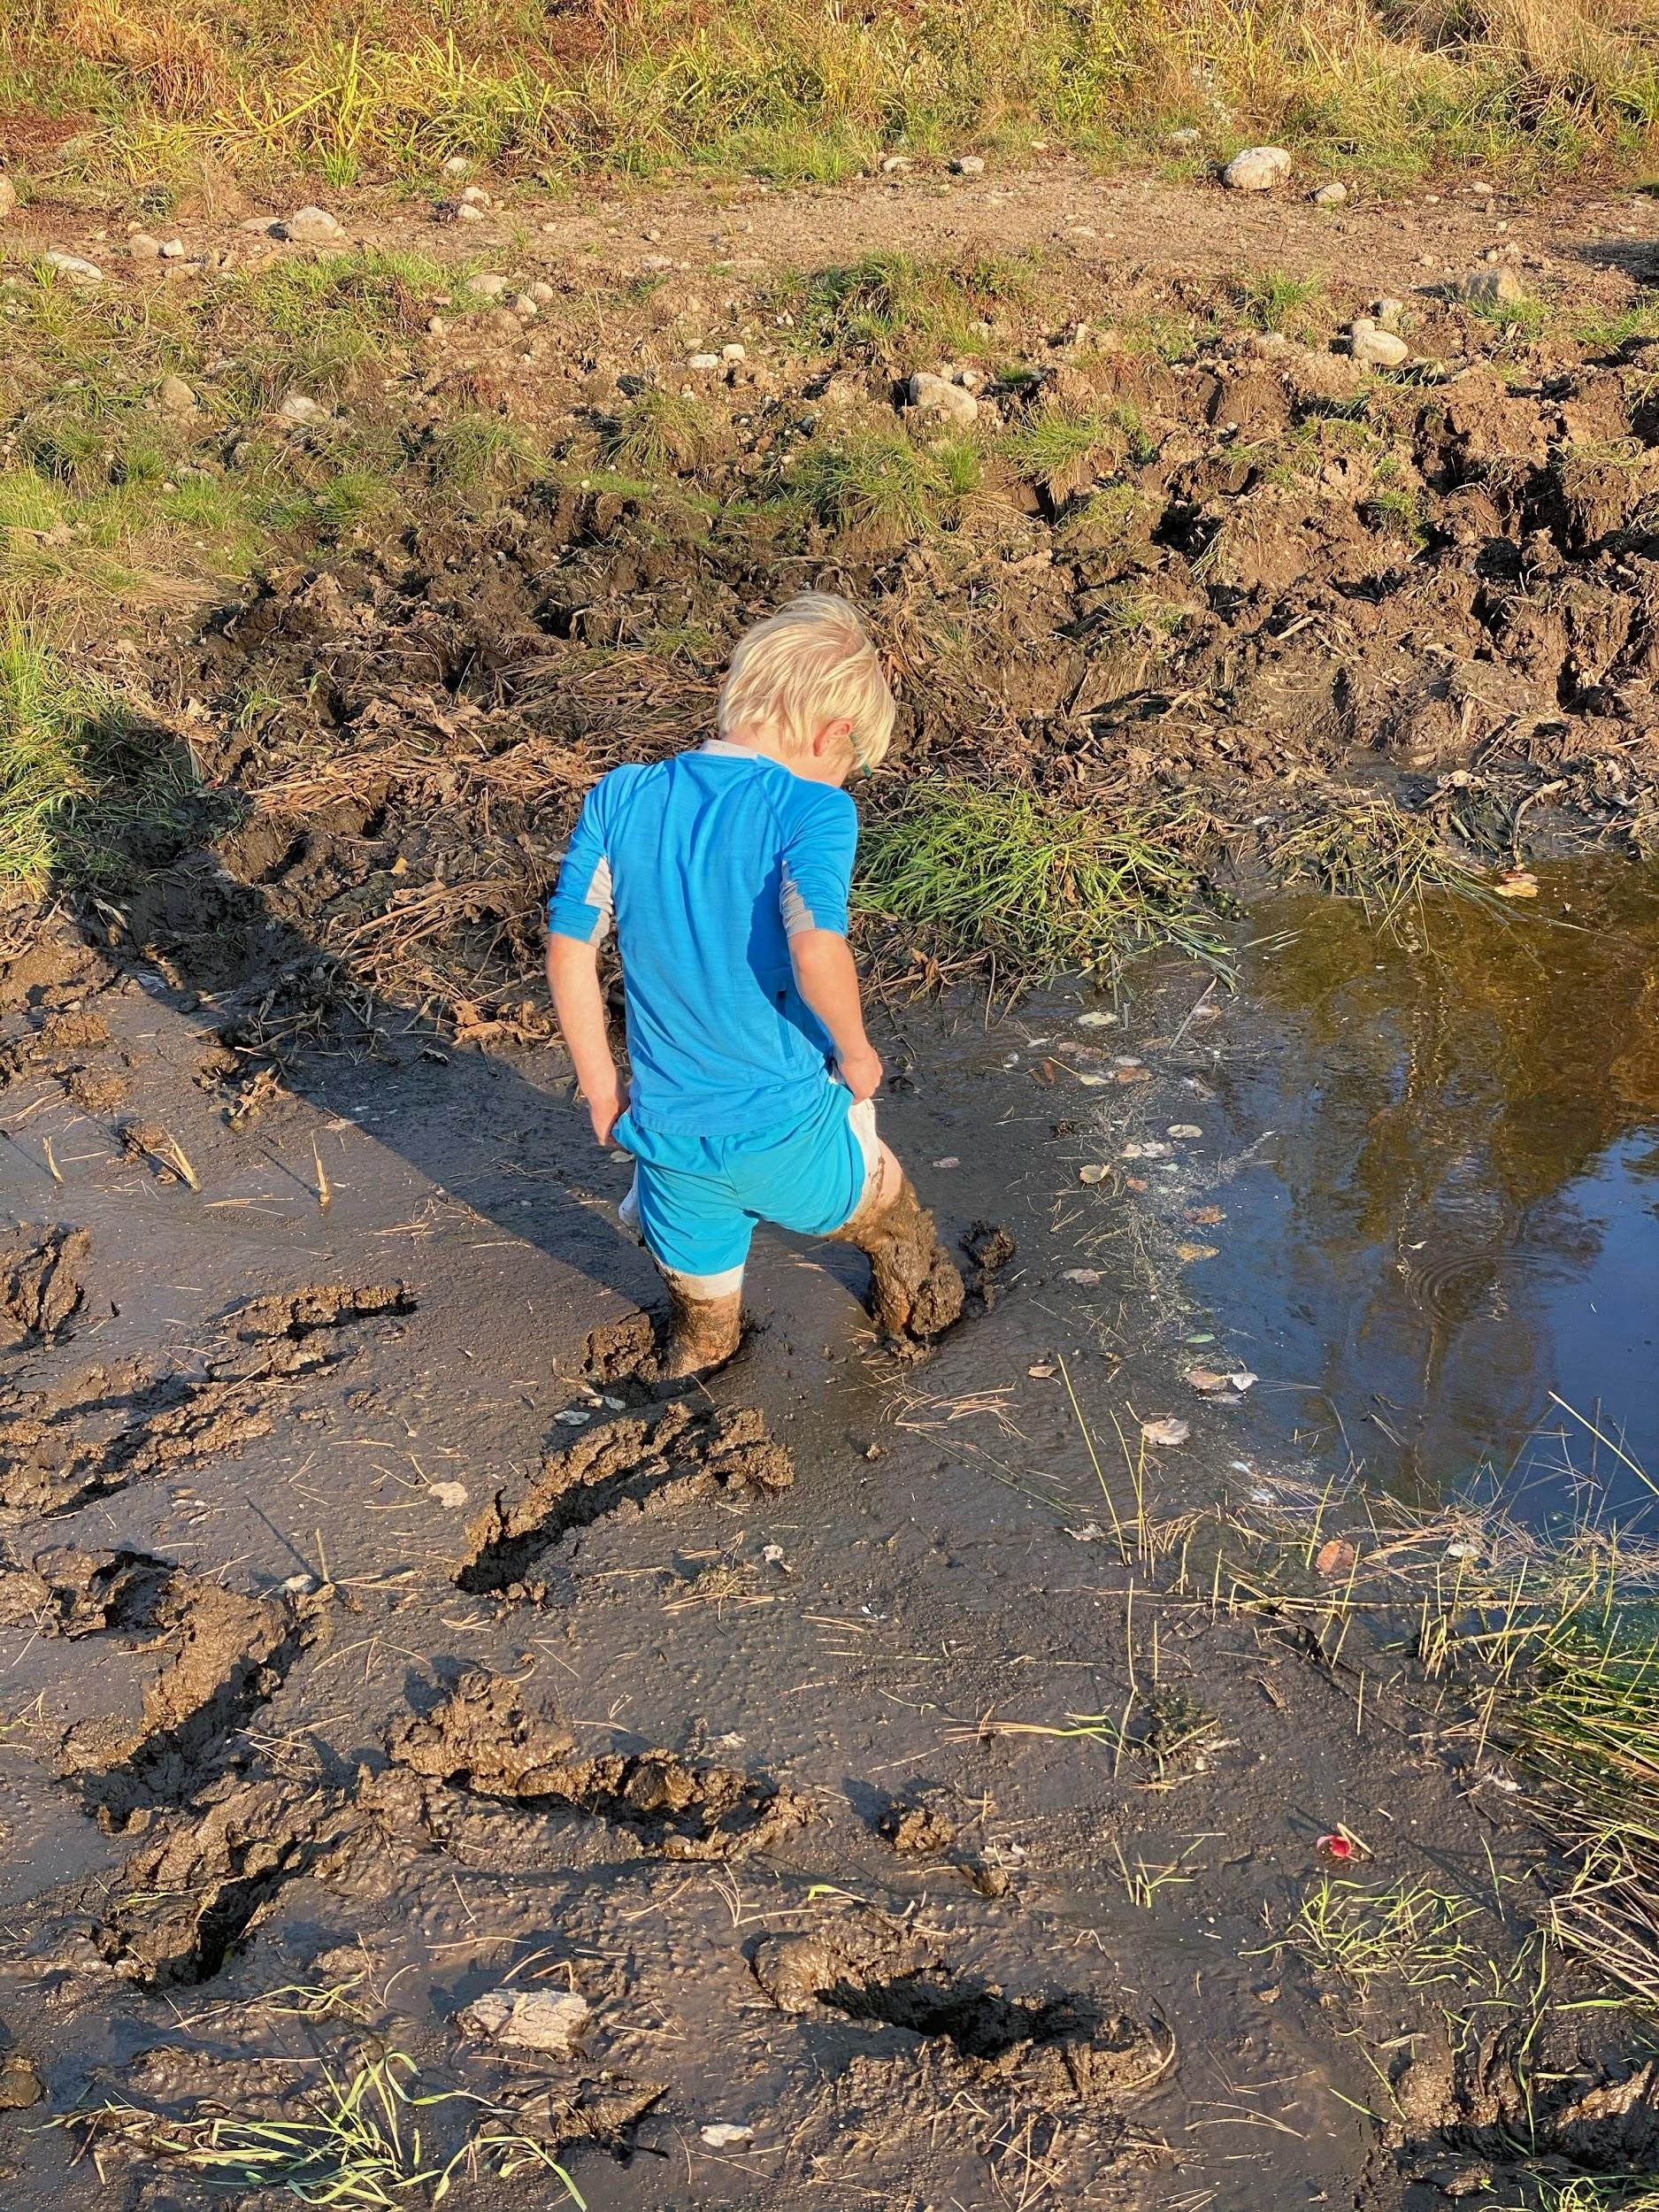 student playing in mud - Best boarding schools - private schools for ADHD - private boarding schools - private schools for learning disabilities – Hampshire Country School